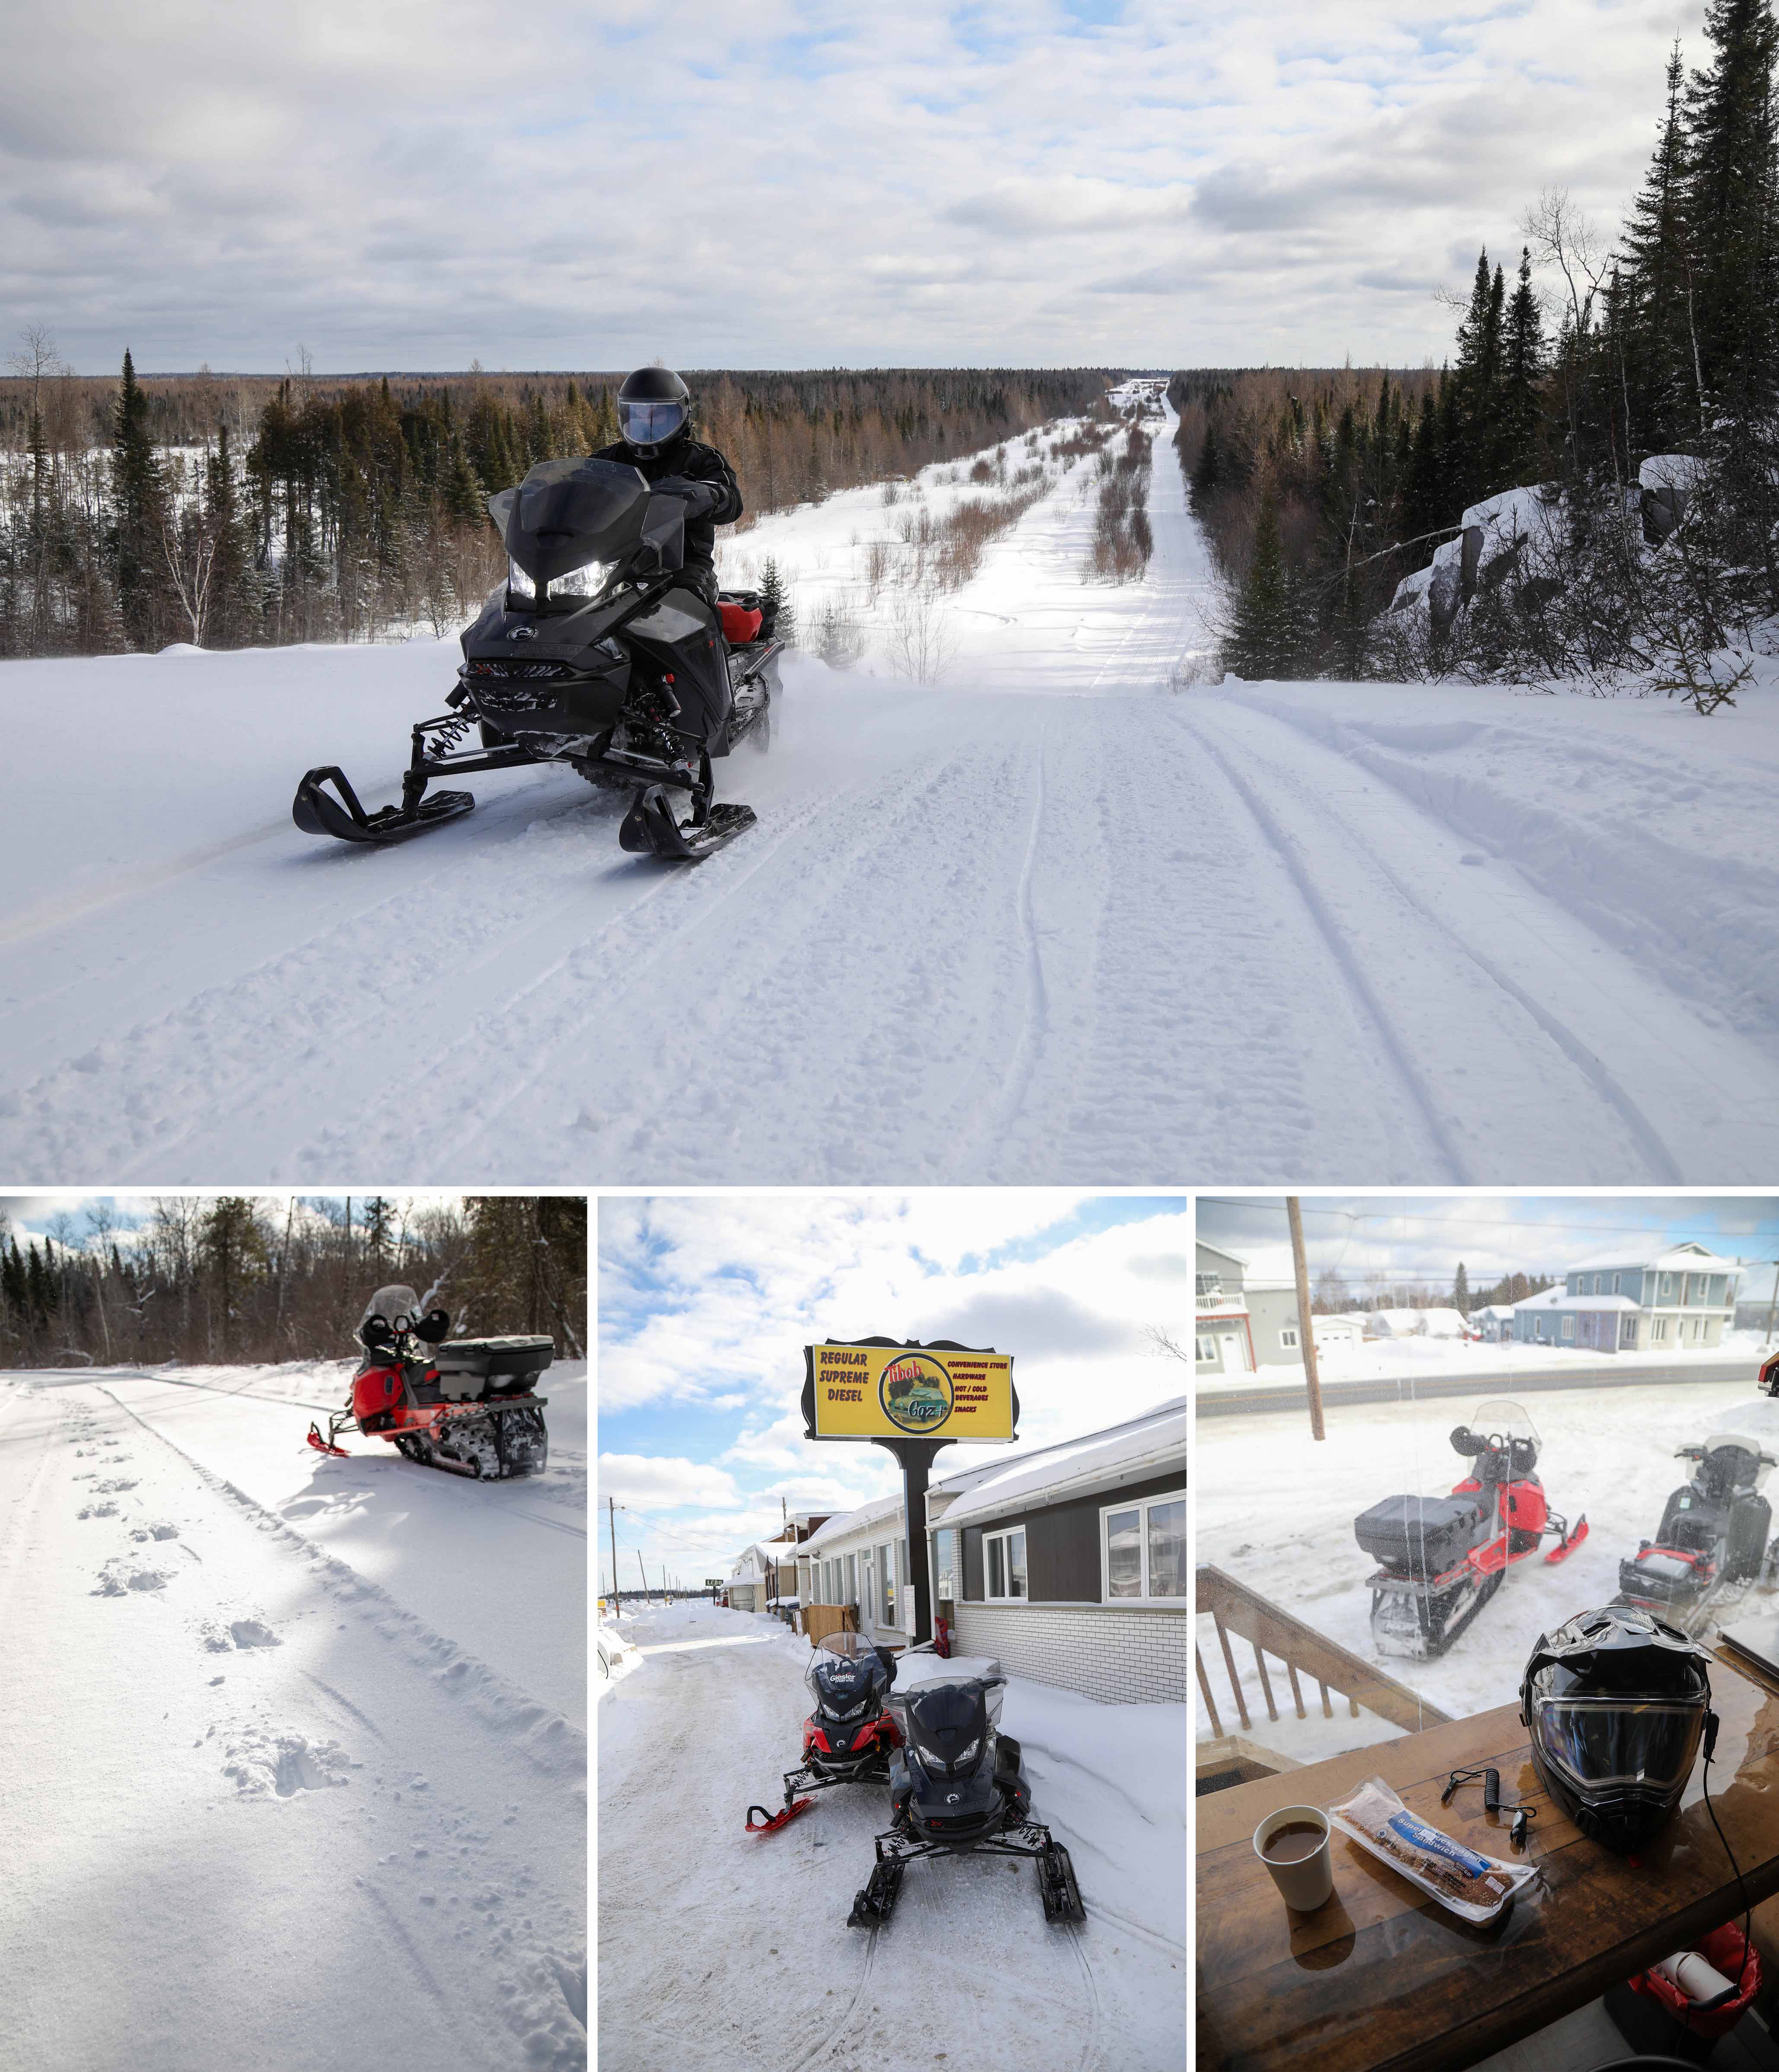 a collage of snowmobiles on snowy trails, parked outside a gas station, and of a snowmobile helmet sitting next to a cup of coffee at a gas station table